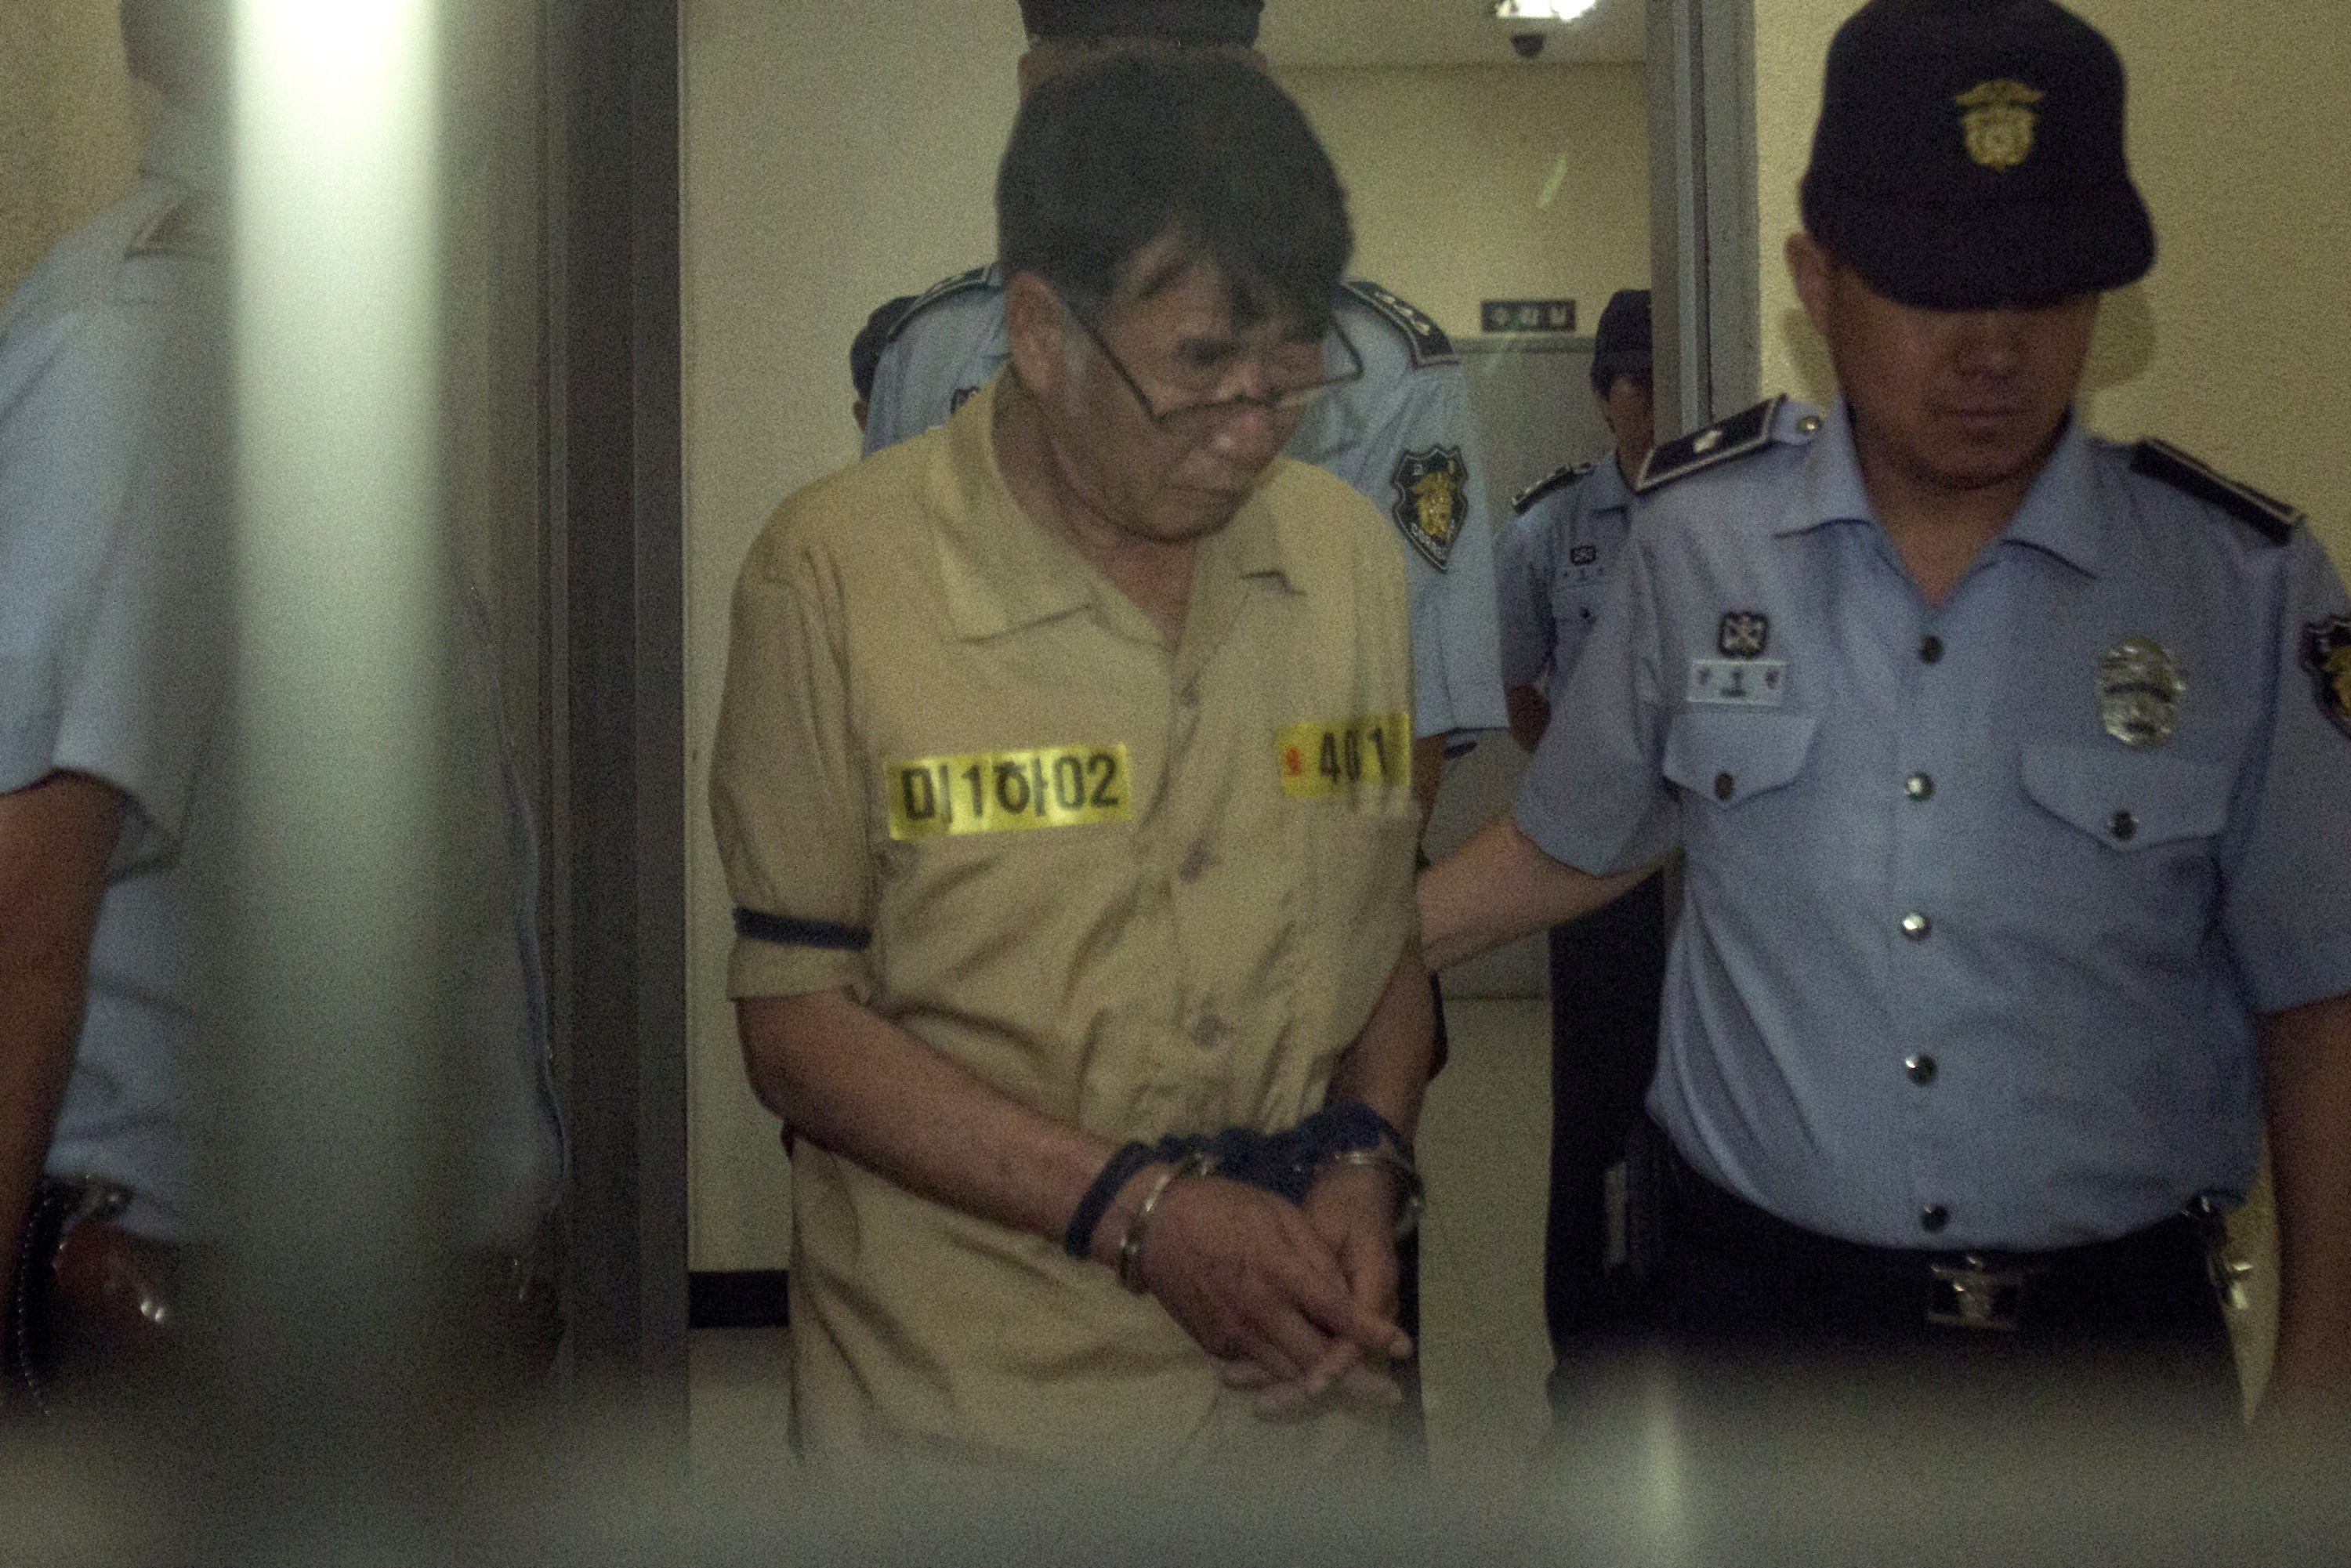 Sewol: South Korean Ferry Captain Sentenced to 36 Years in Prison | Time